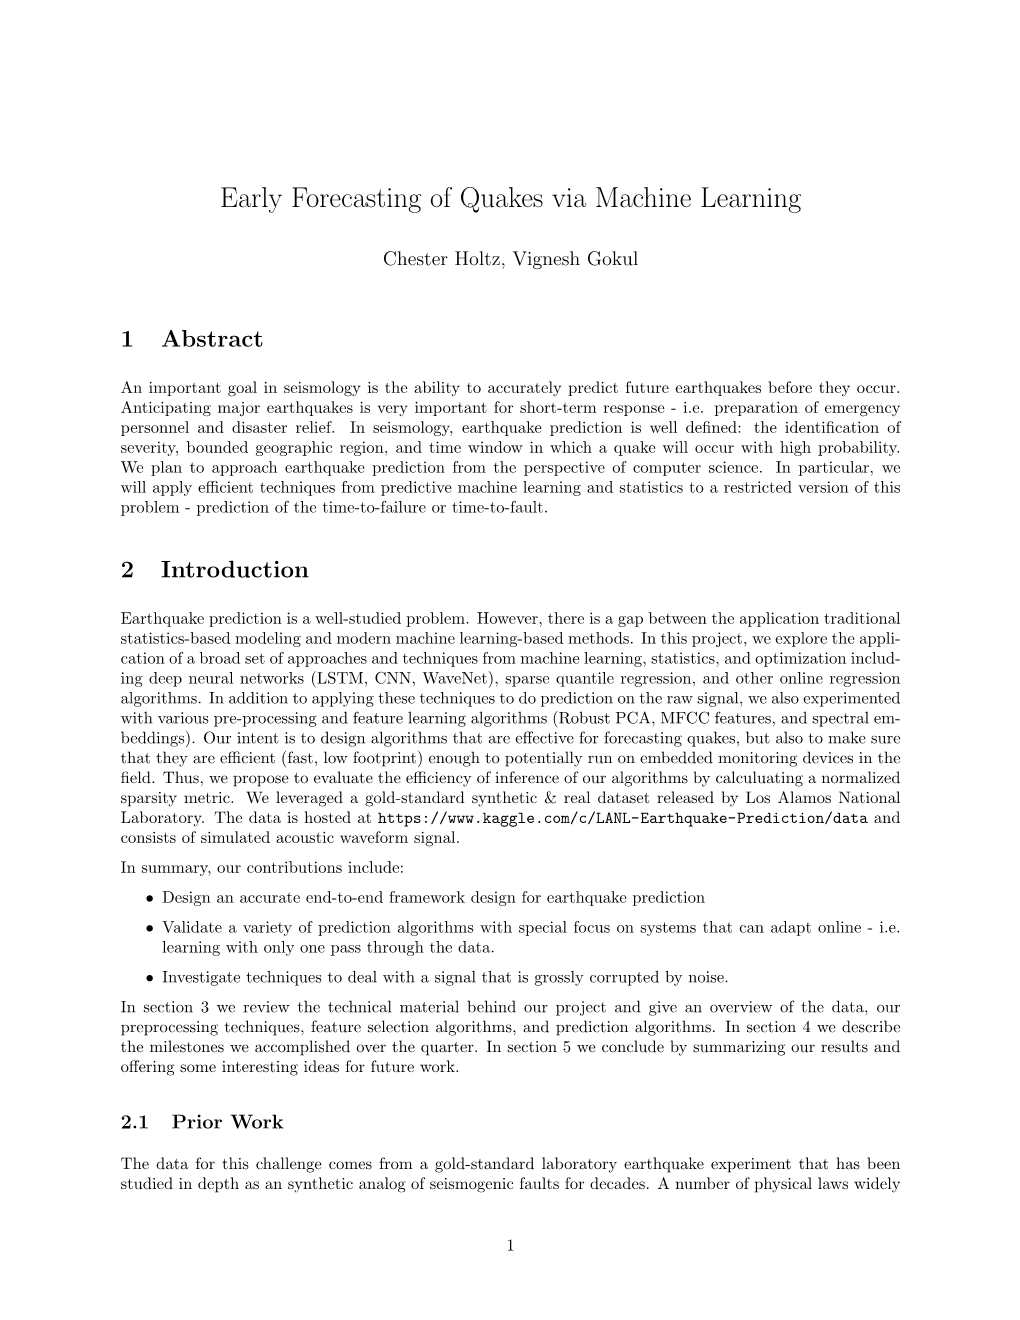 Early Forecasting of Quakes Via Machine Learning